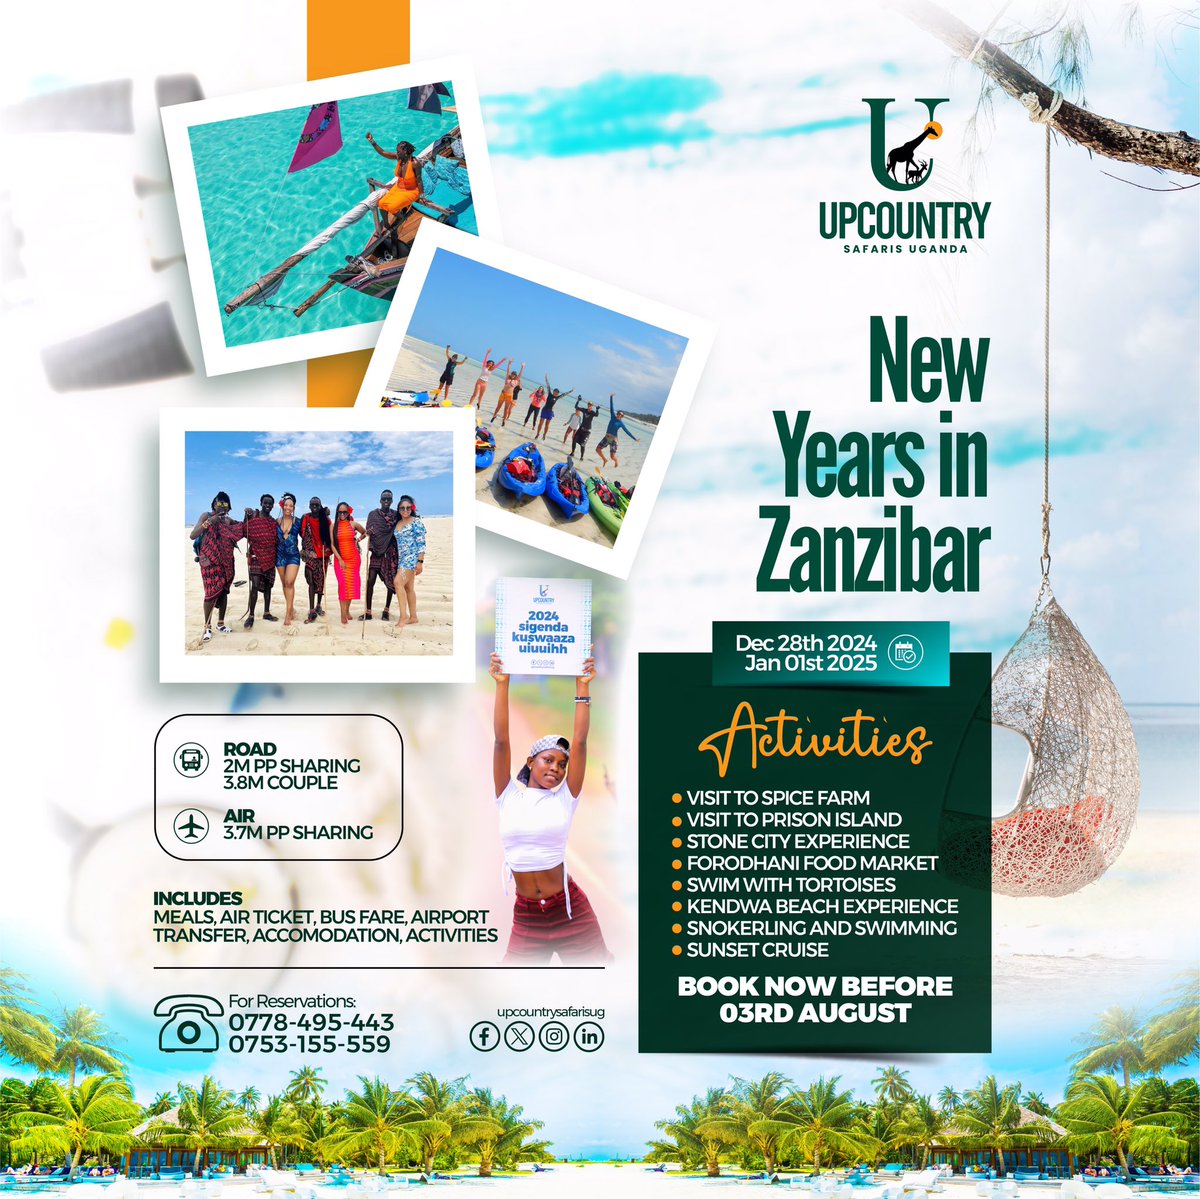 The ultimate 2024 final trip is here with @Upcountrysafari 

From pristine beaches to vibrant markets, miss not this unforgettable experience.

I highly recommend booking your next adventure with @Upcountrysafari 🌴🦁 #travelgoals #upcountrysafarisug #Zanzibar I will be there!